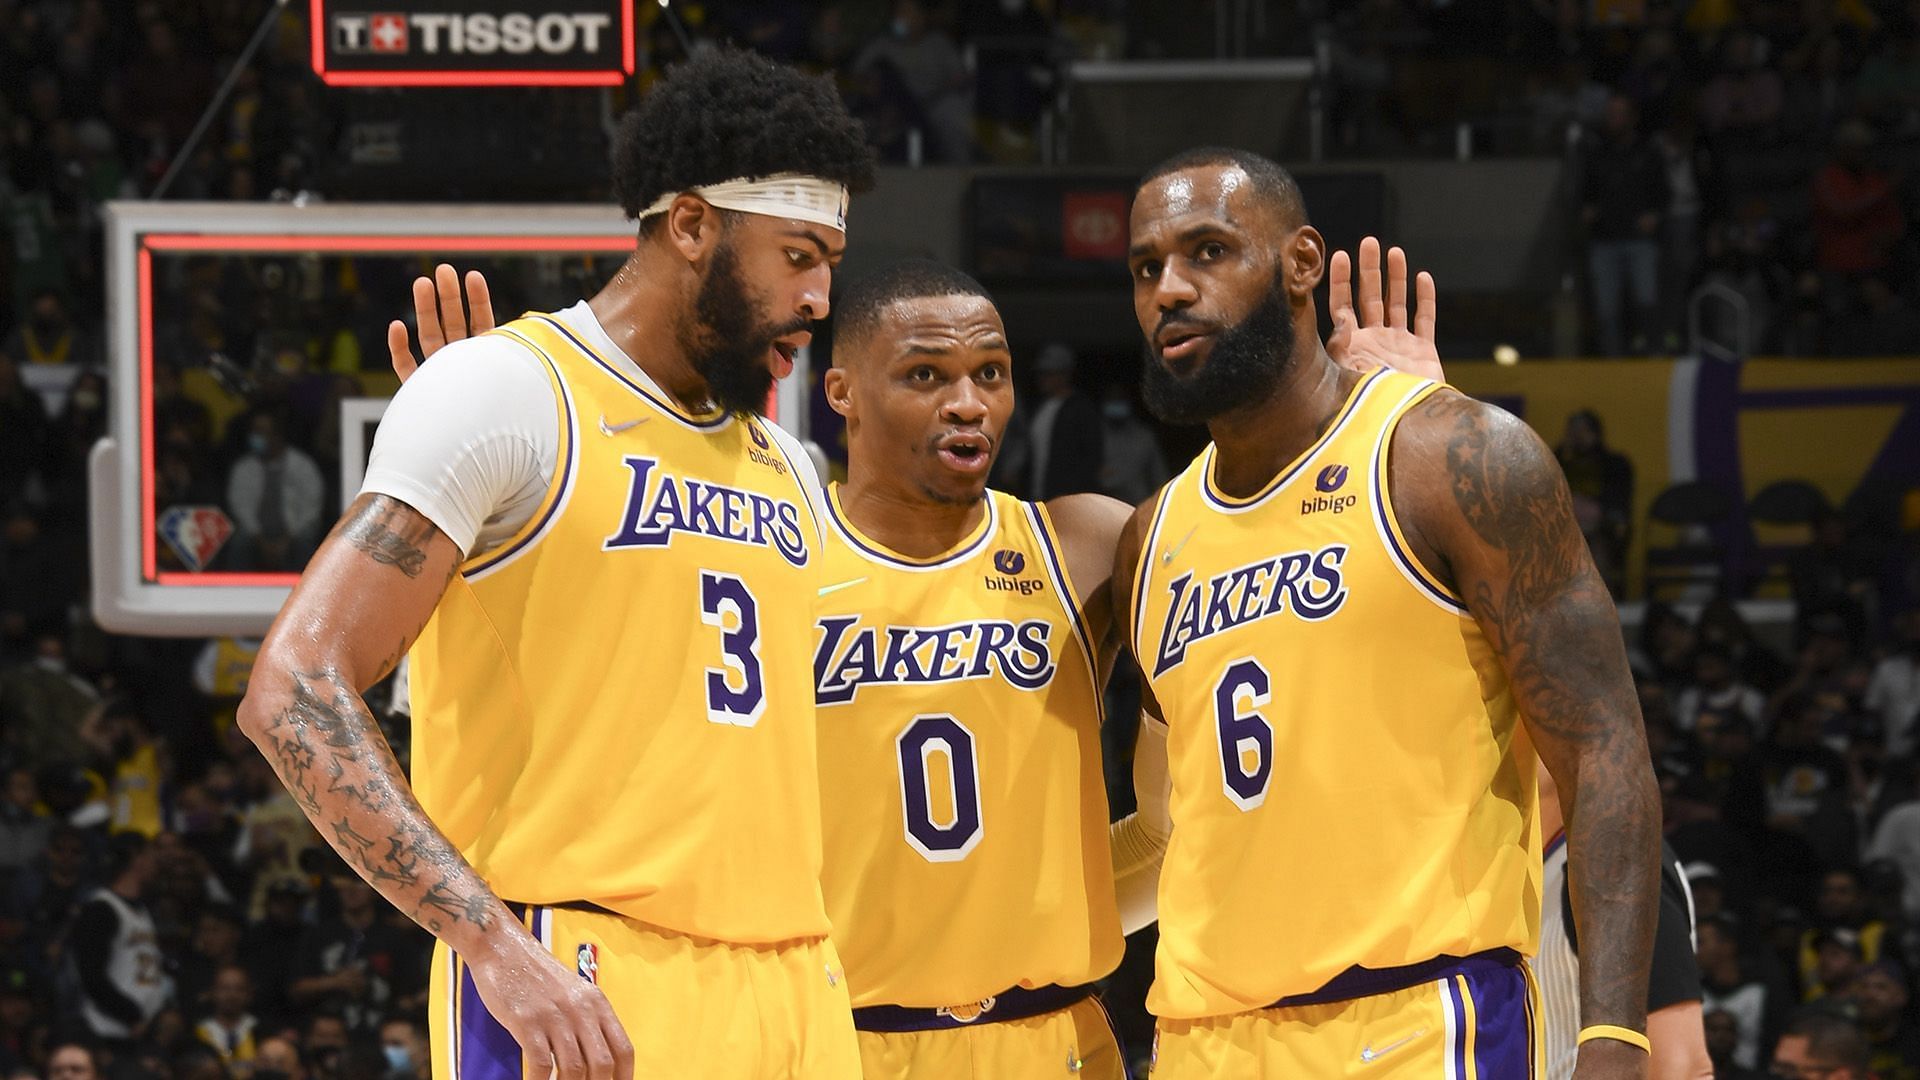 From tournament favorites to desperately hoping to enter the play-in tournament, the Lakers&#039; season has been terrible. [Photo: NBA.com]